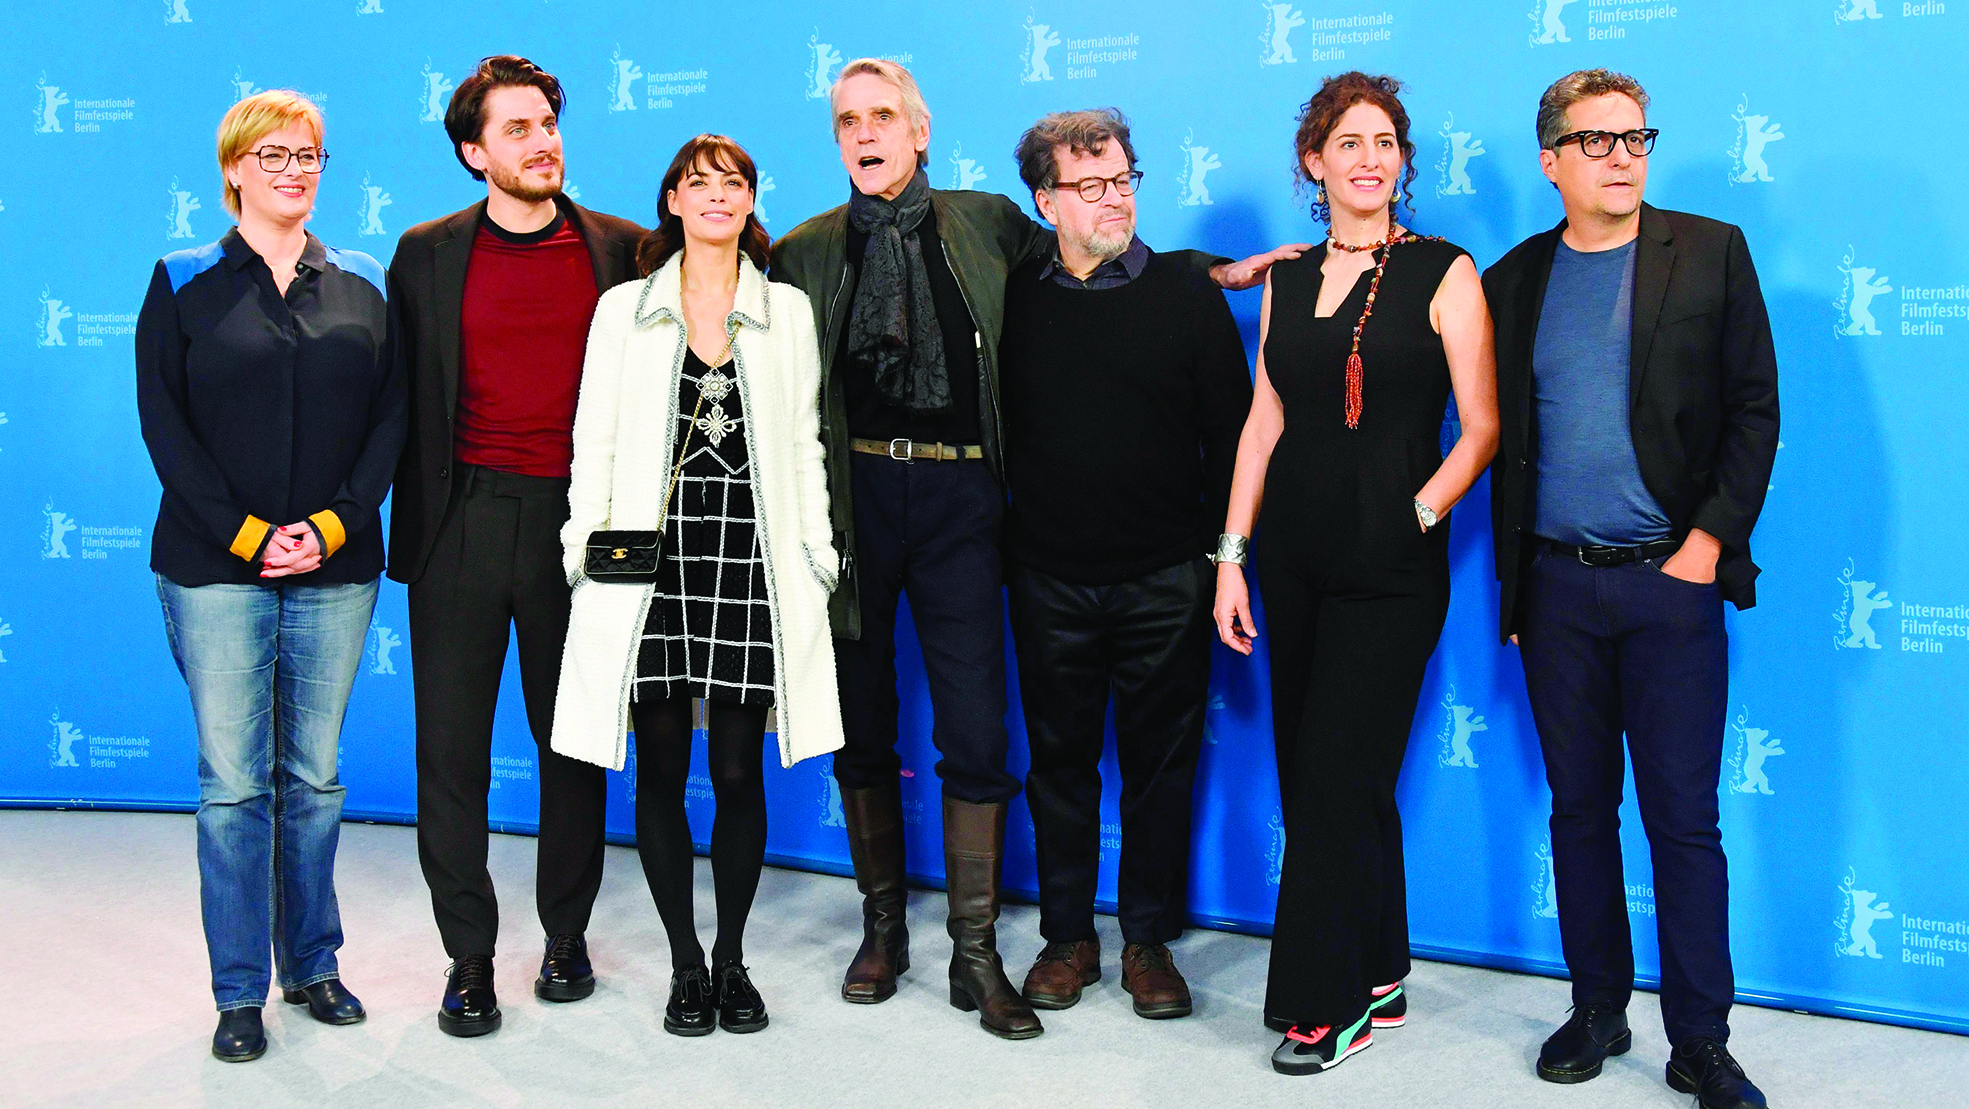 The Berlinale 2020 film festival International Jury (L-R) German film producer Bettina Brokemper, Italian actor Luca Marinelli, French-Argentinian actress Berenice Bejo, Jury director British actor Jeremy Irons, US director Kenneth Lonergan, Palestinian-US film director and writer Annemarie Jacir and Brazilian director Kleber Mendonca Filho pose during a photocall on February 20, 2020, on the day of the official opening of the 70th Berlinale film festival in Berlin. - The 11-day Berlinale, one of Europe's most prestigious film extravaganzas alongside Cannes and Venice, celebrates its 70th anniversary in 2020 and will be running from February 20 to March 1, 2020. (Photo by John MACDOUGALL / AFP)